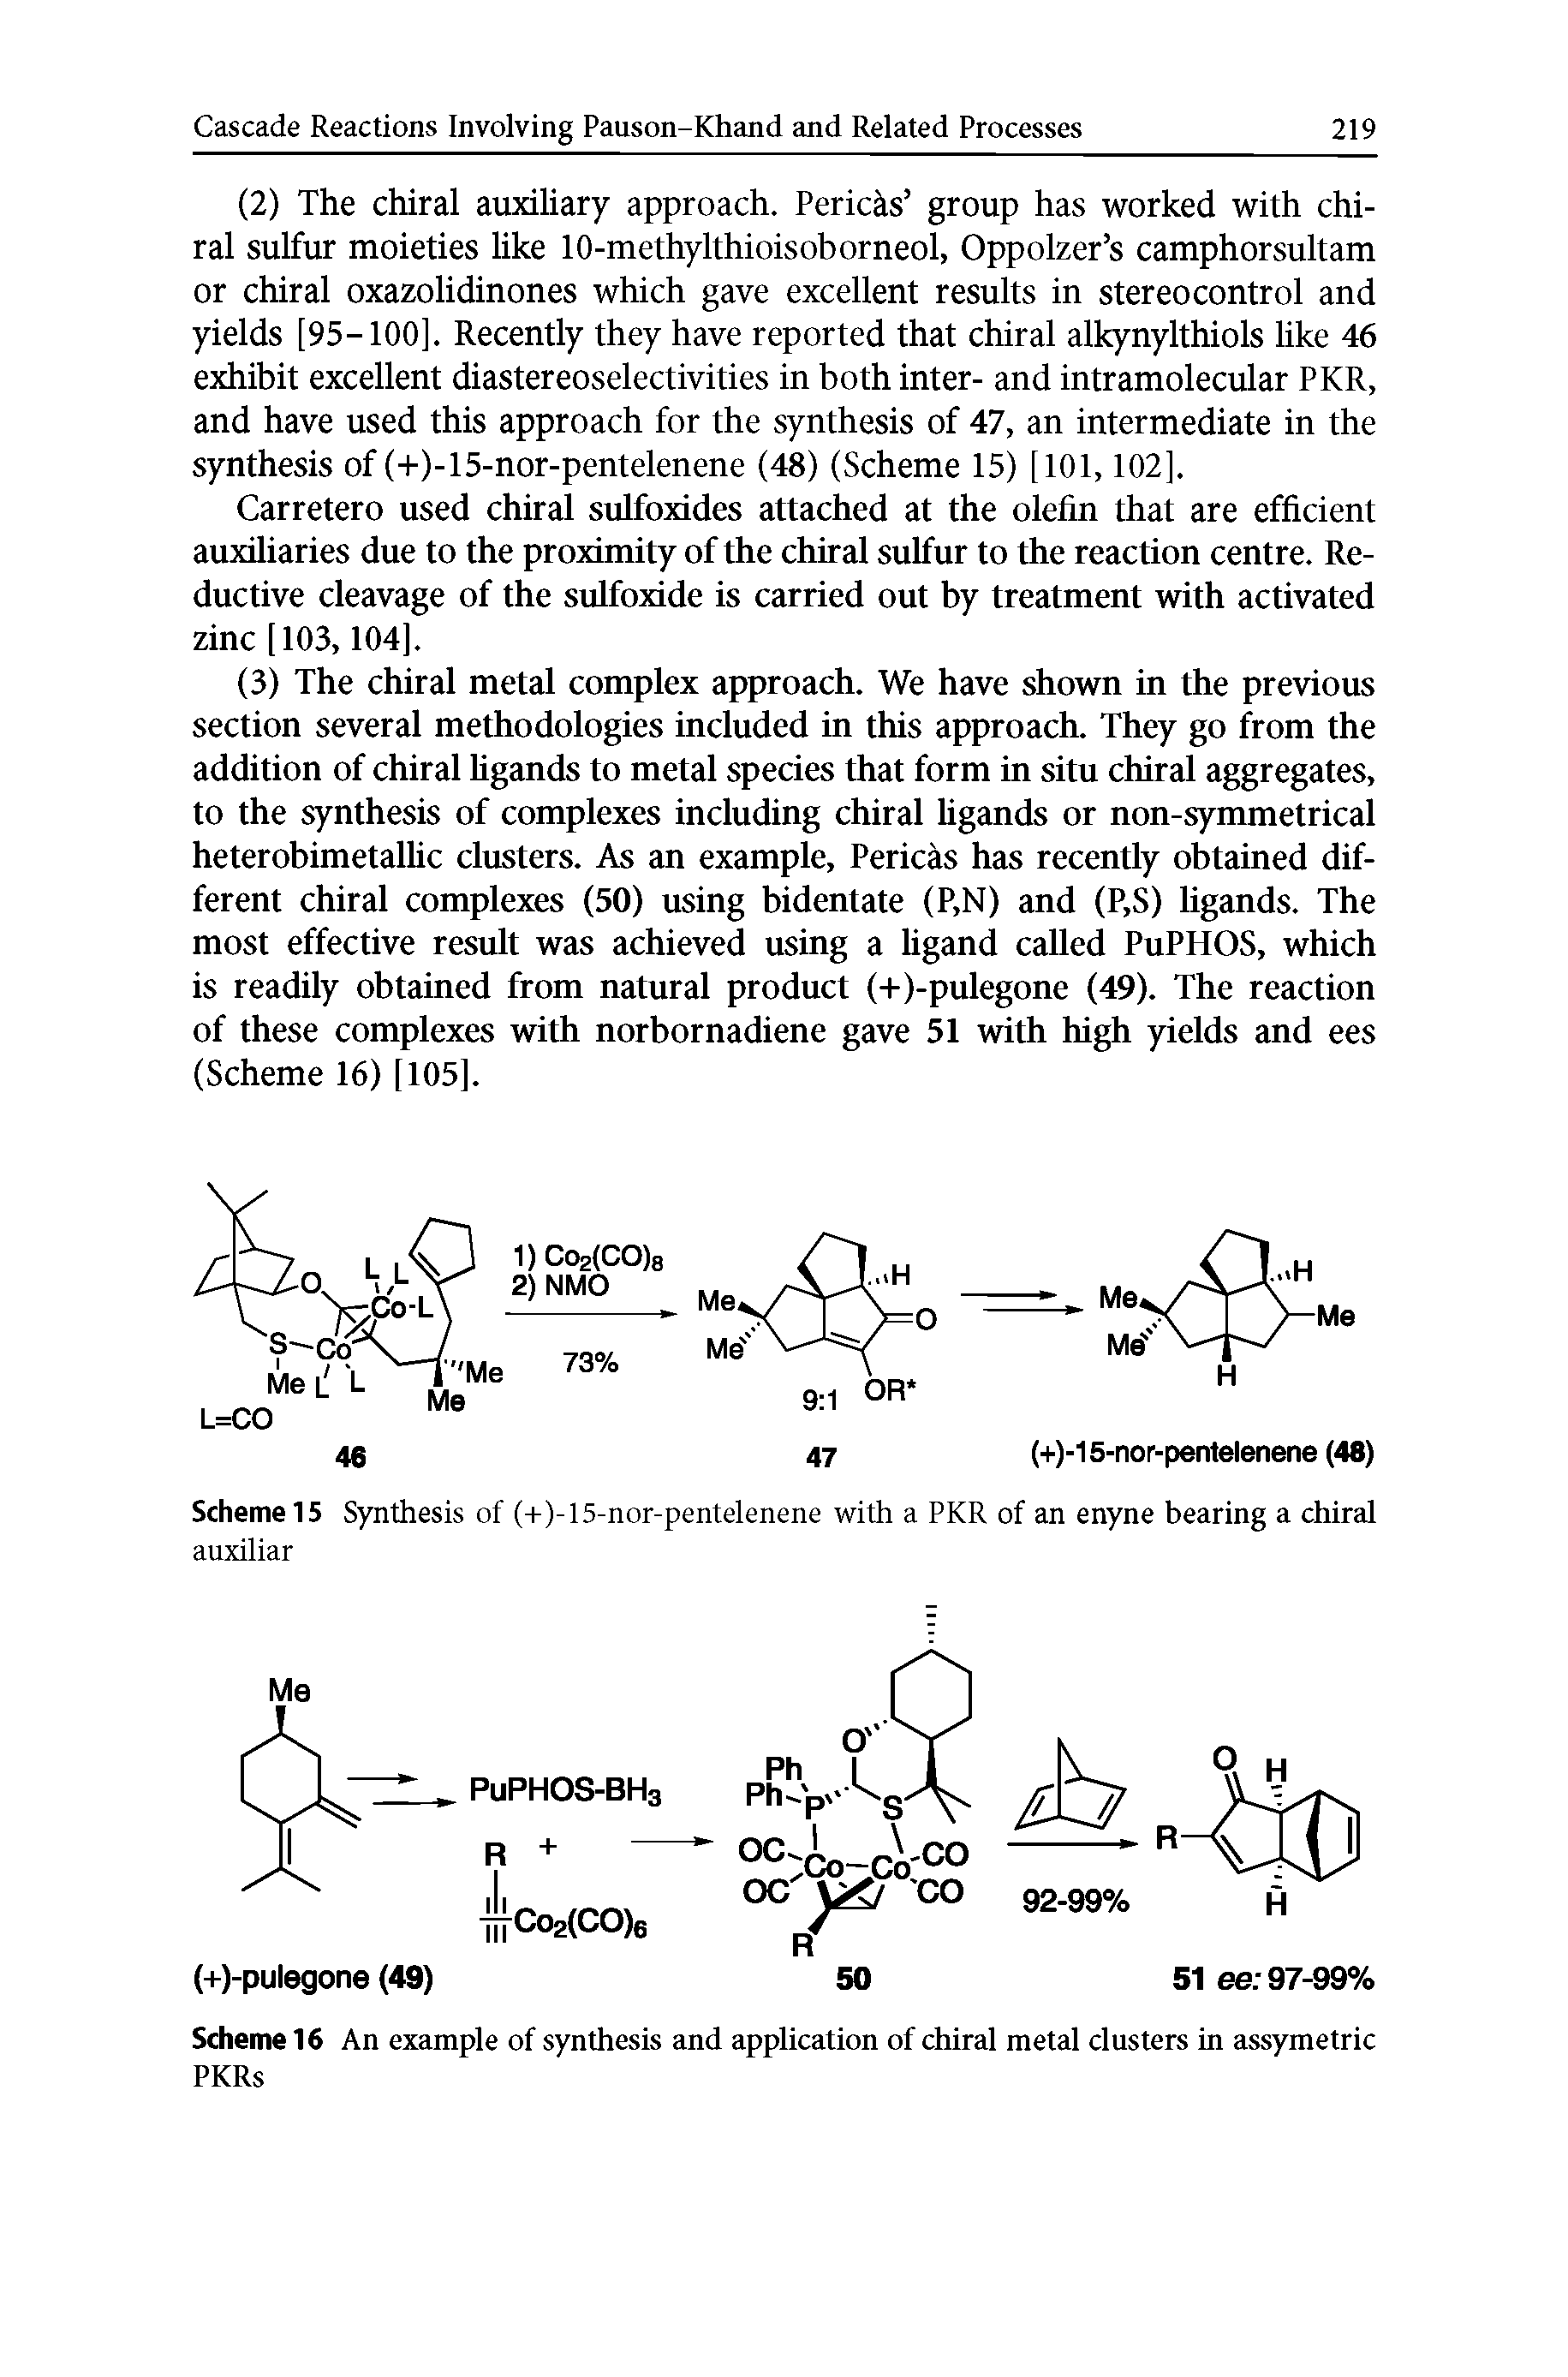 Scheme 15 Synthesis of (+)-15-nor-pentelenene with a PKR of an enyne bearing a chiral auxiliar...